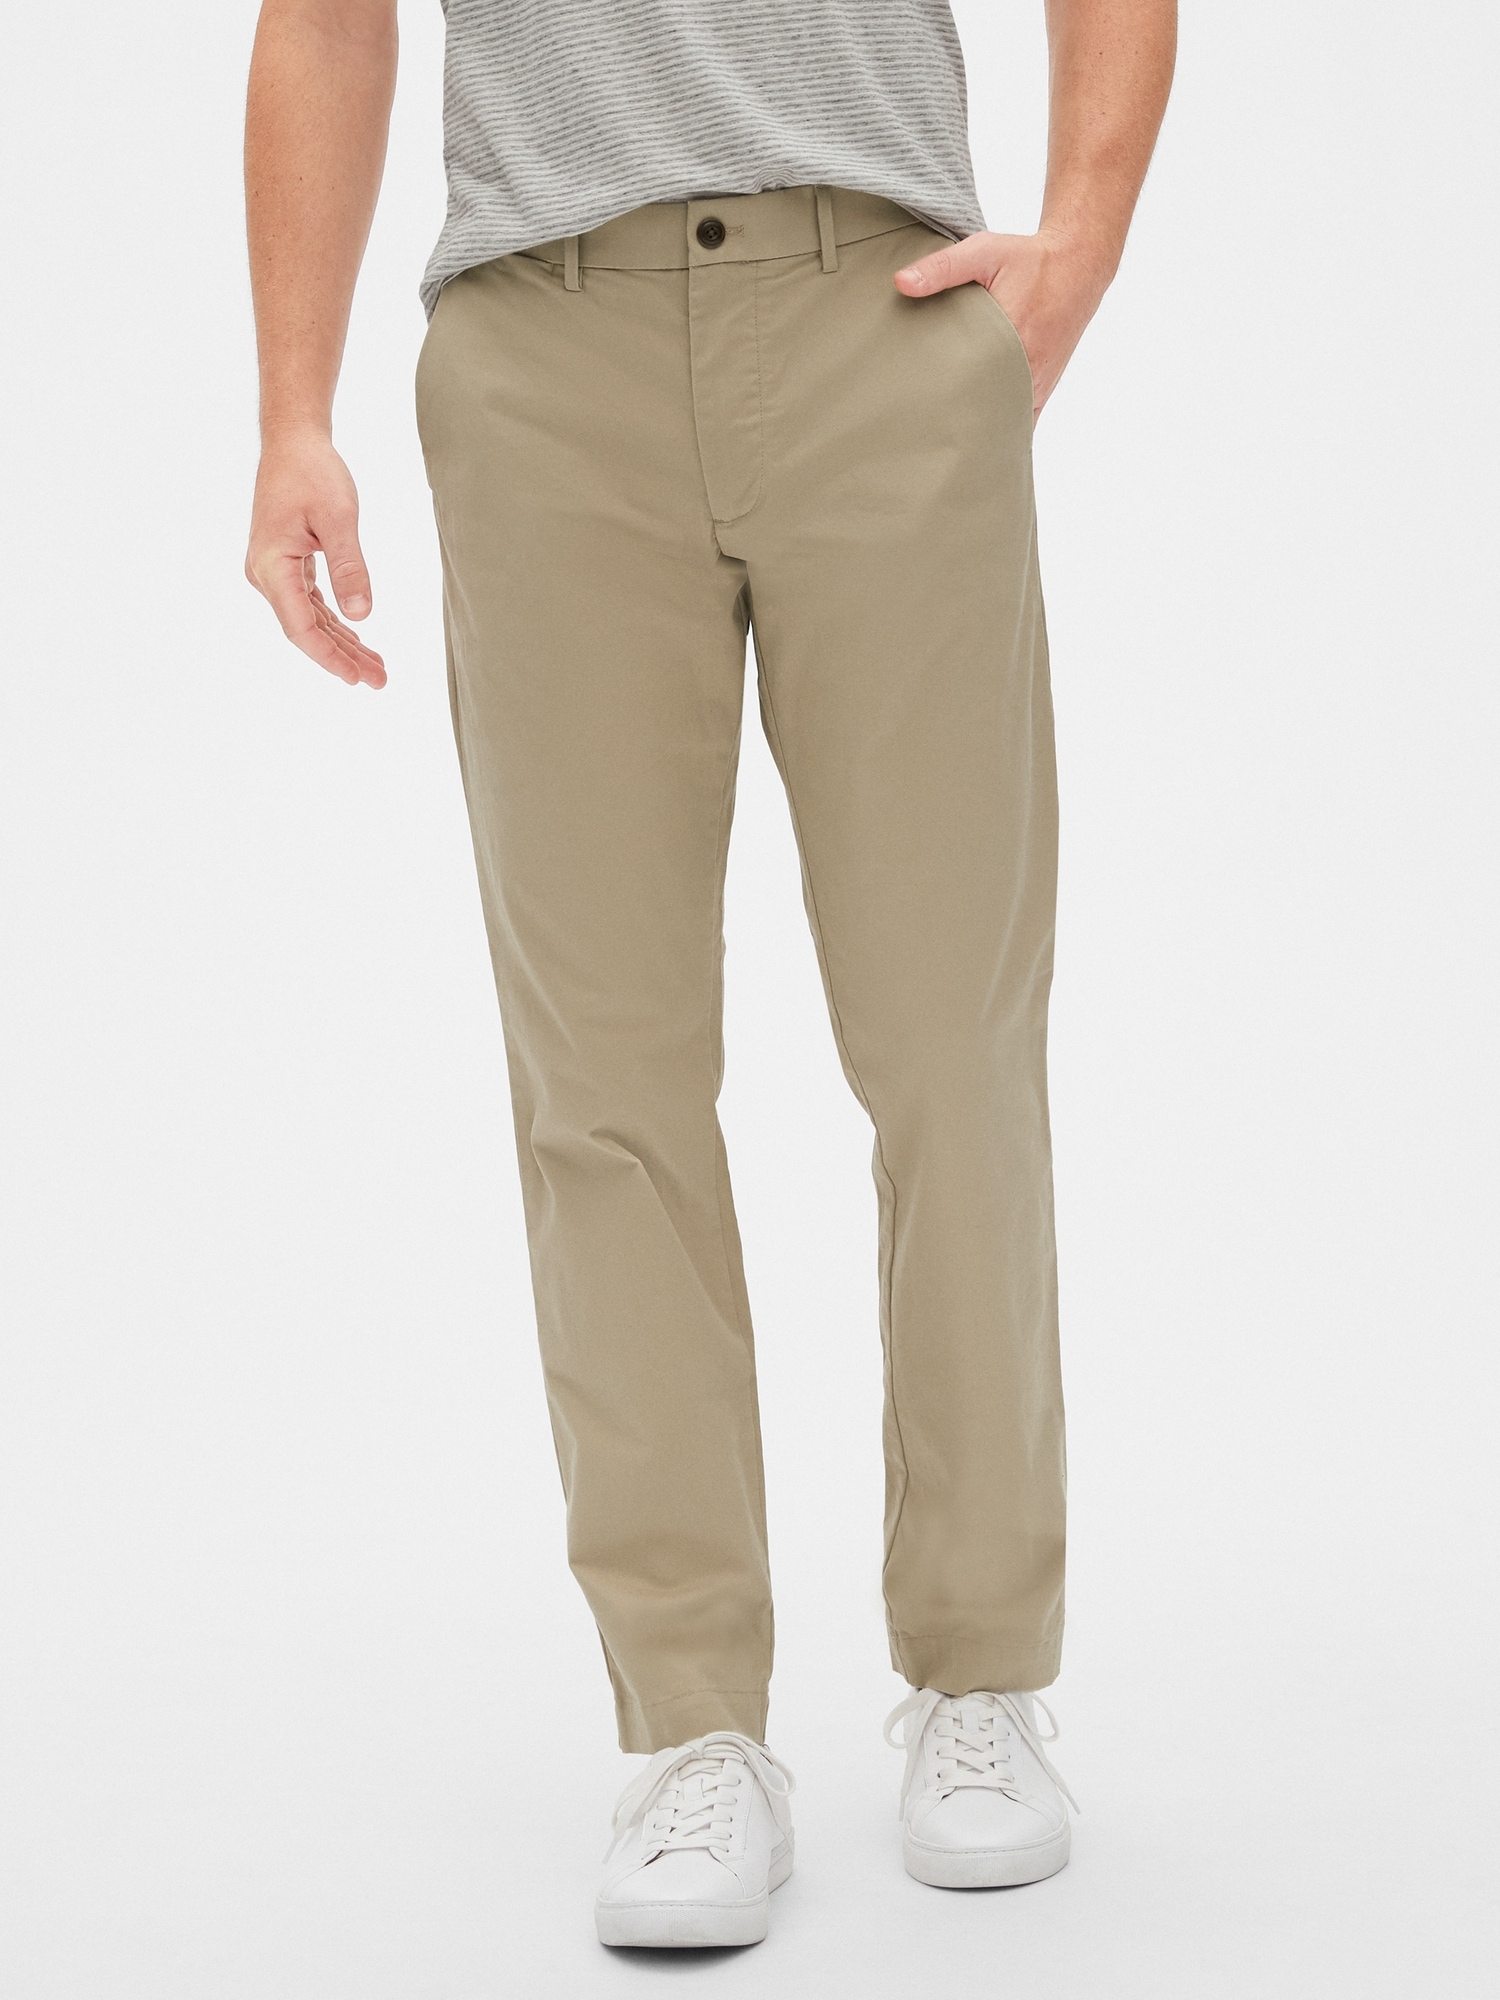 Modern Khakis in Straight Fit with 